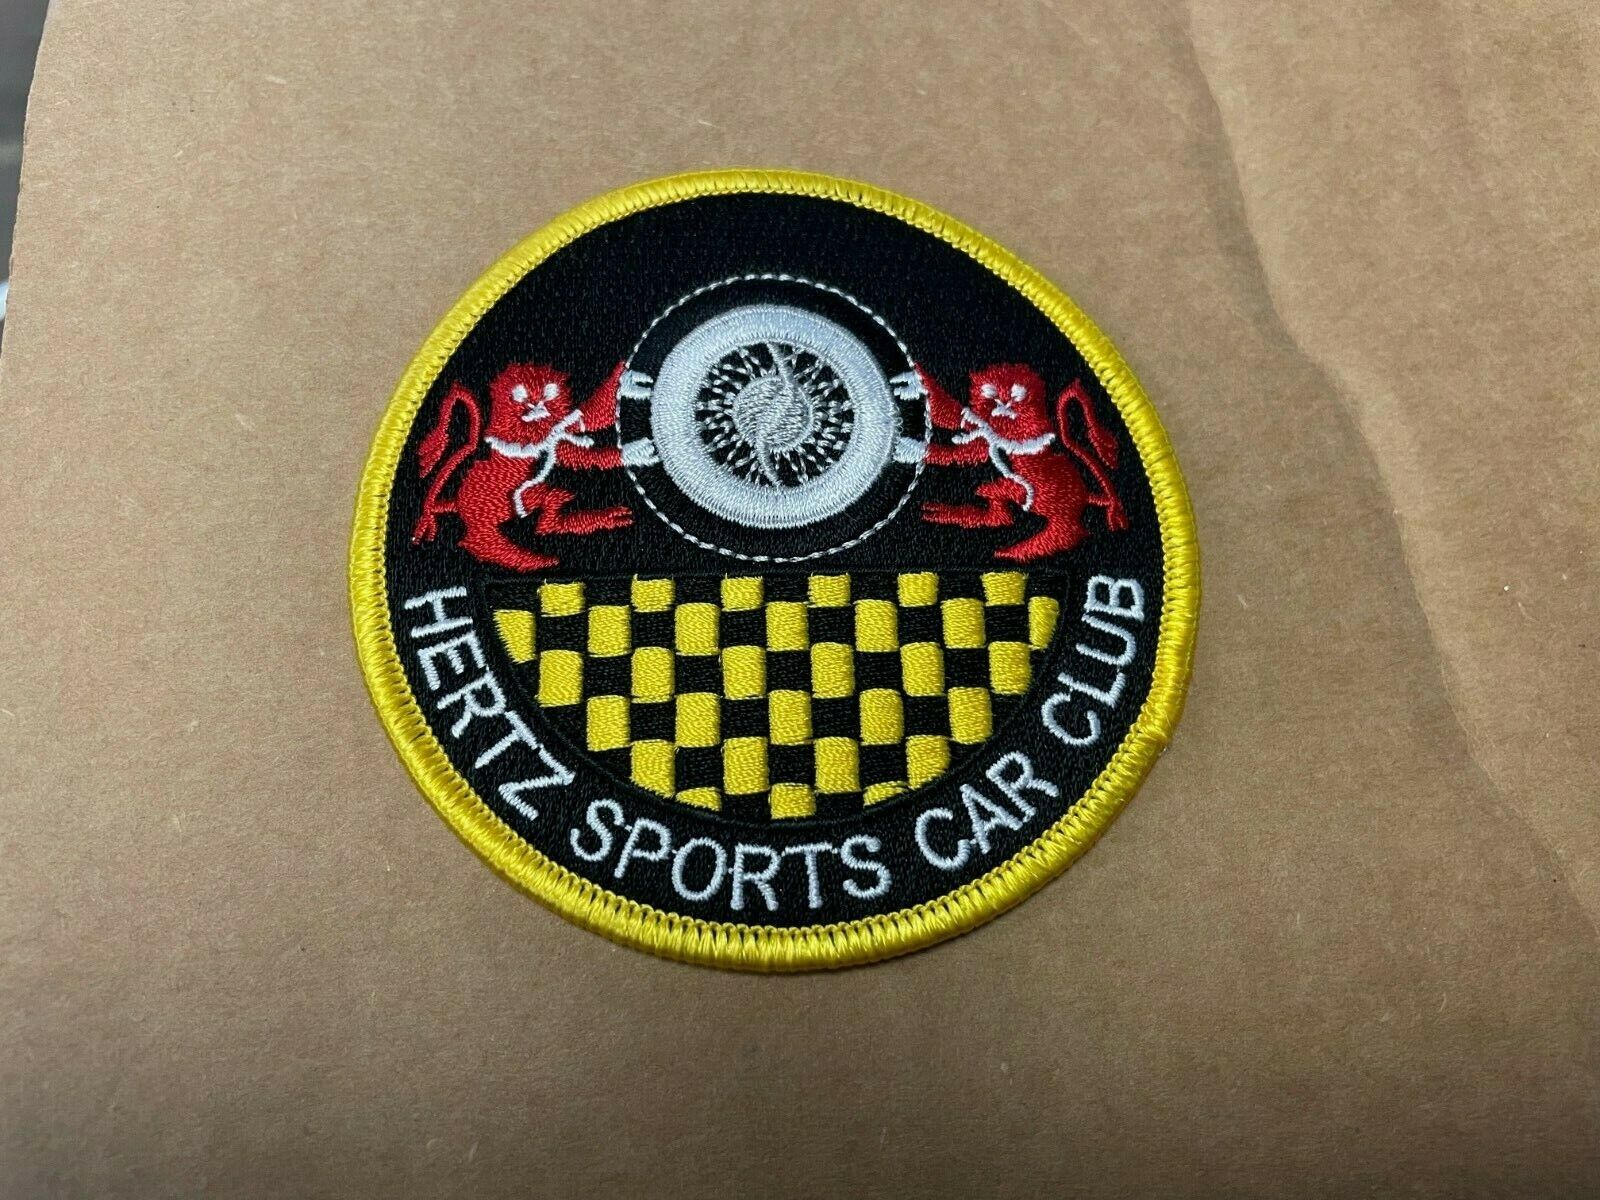 1960's HERTZ SPORTS CAR CLUB GT350H SHELBY MUSTANG ROUND BLACK GOLD LOGO PATCH